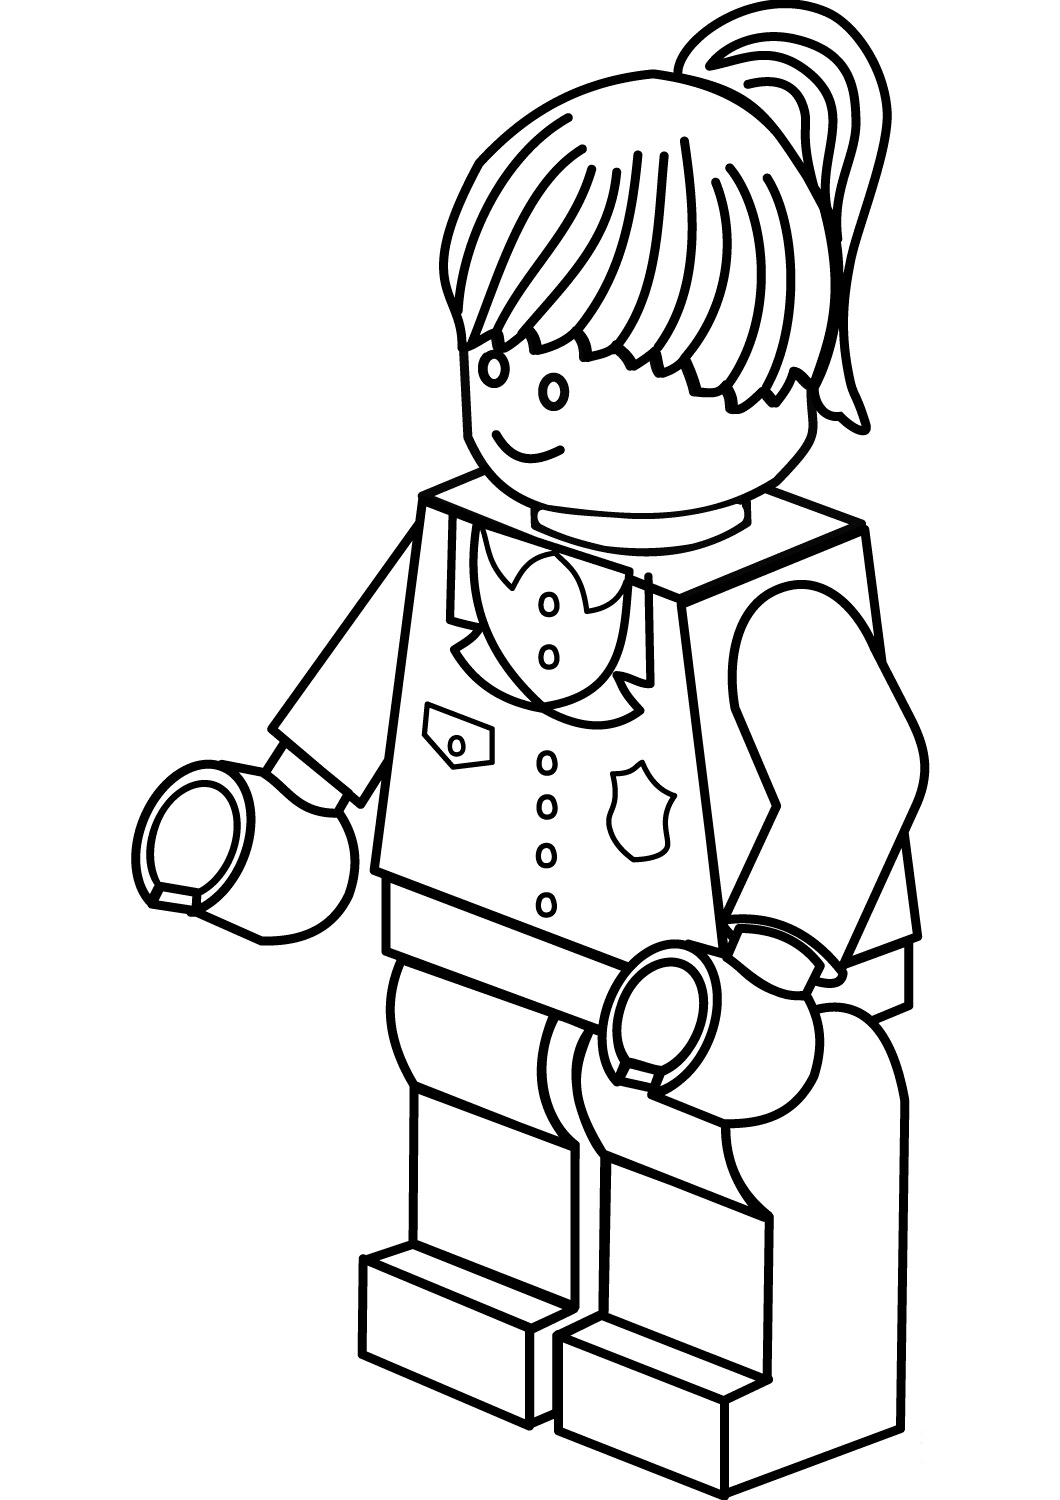 Lego City Police Woman Coloring Page